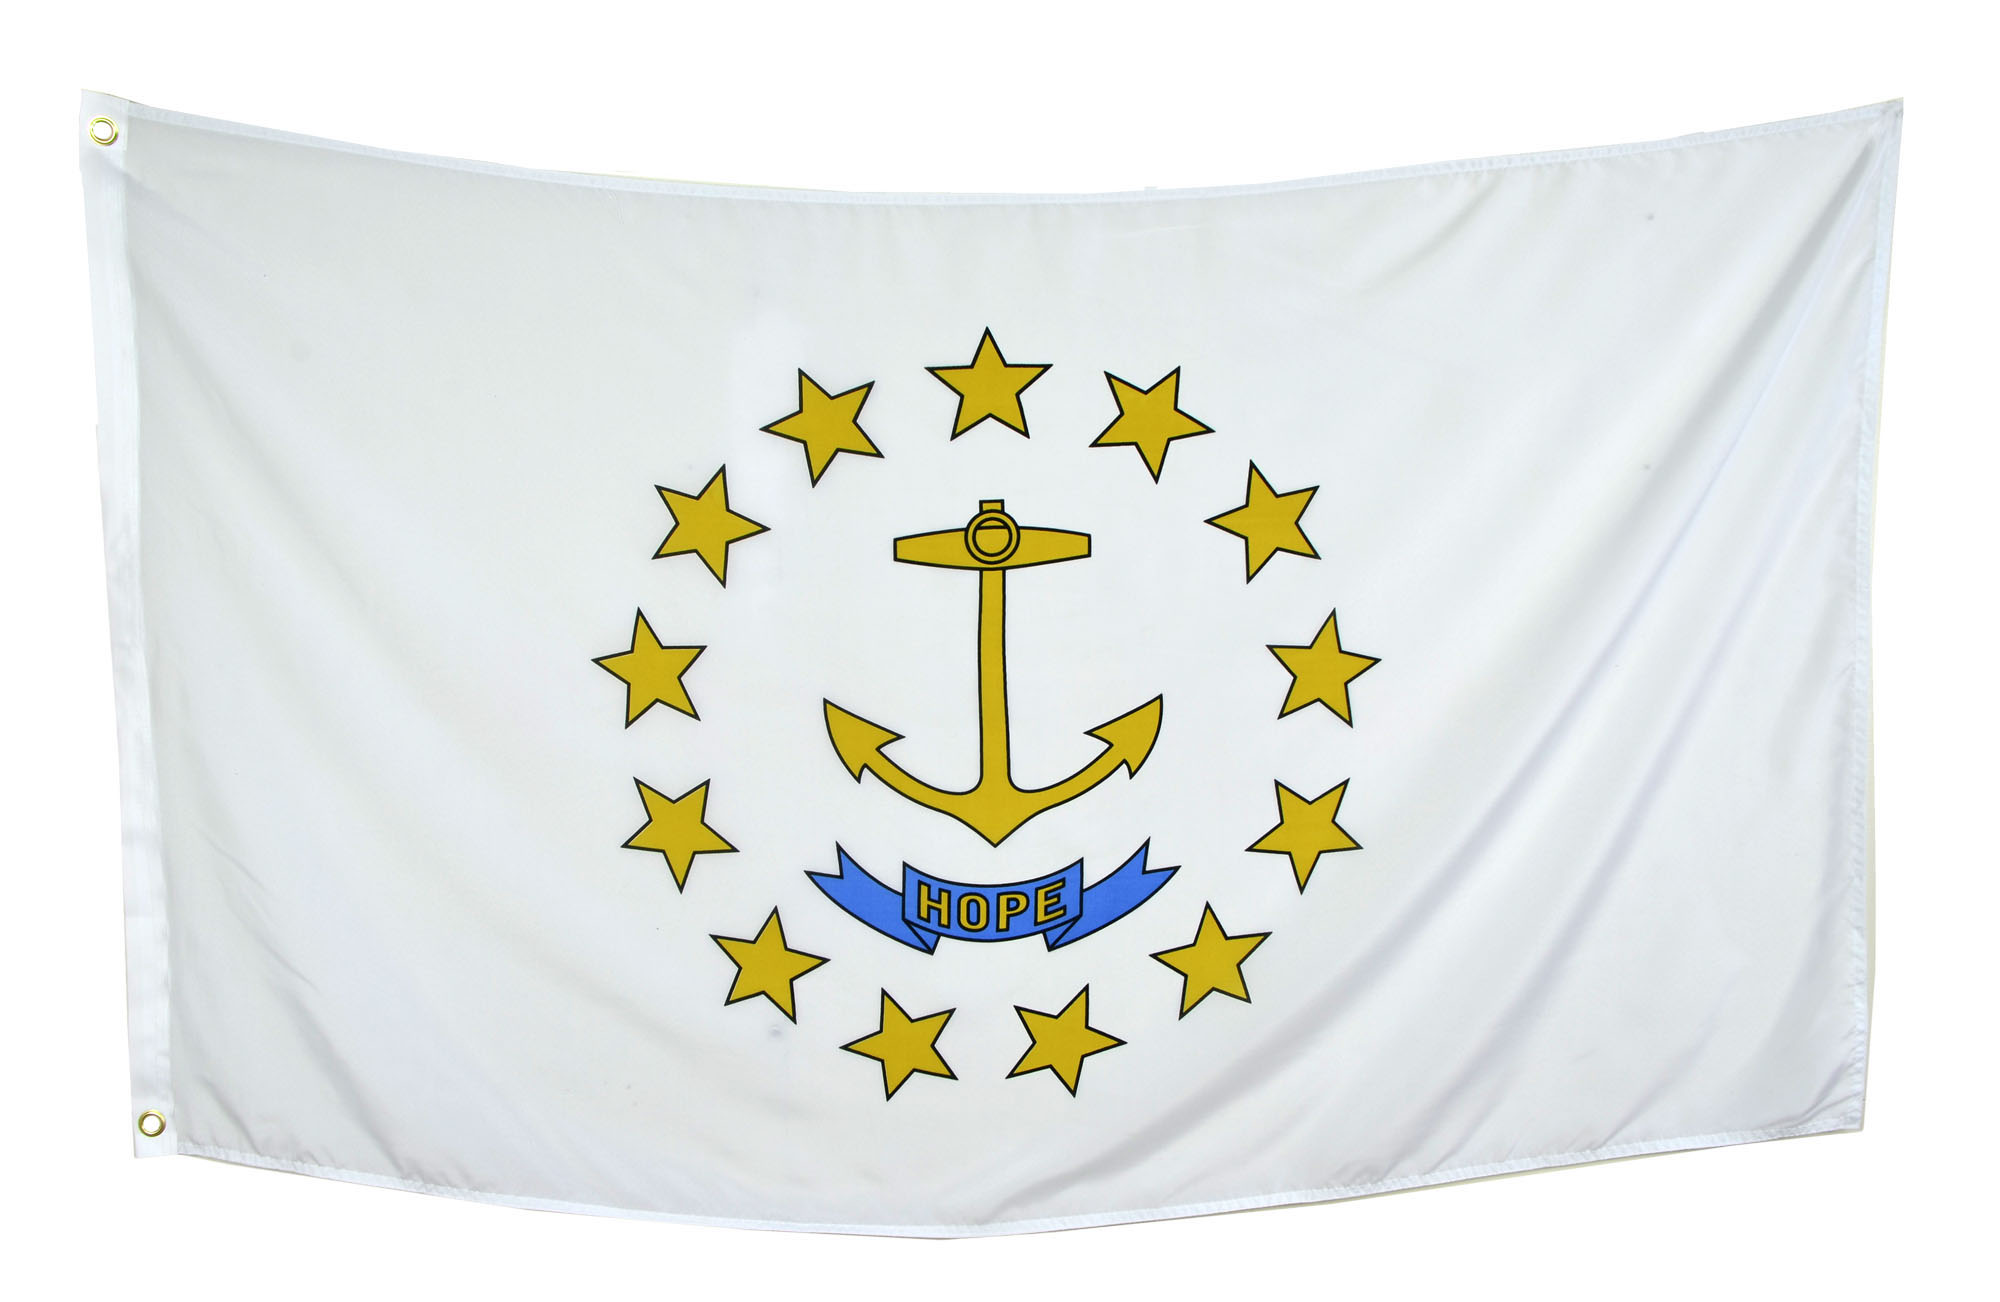 Shop72 - High Quality US State Flags - Rhode Island - 3x5' - Polyester